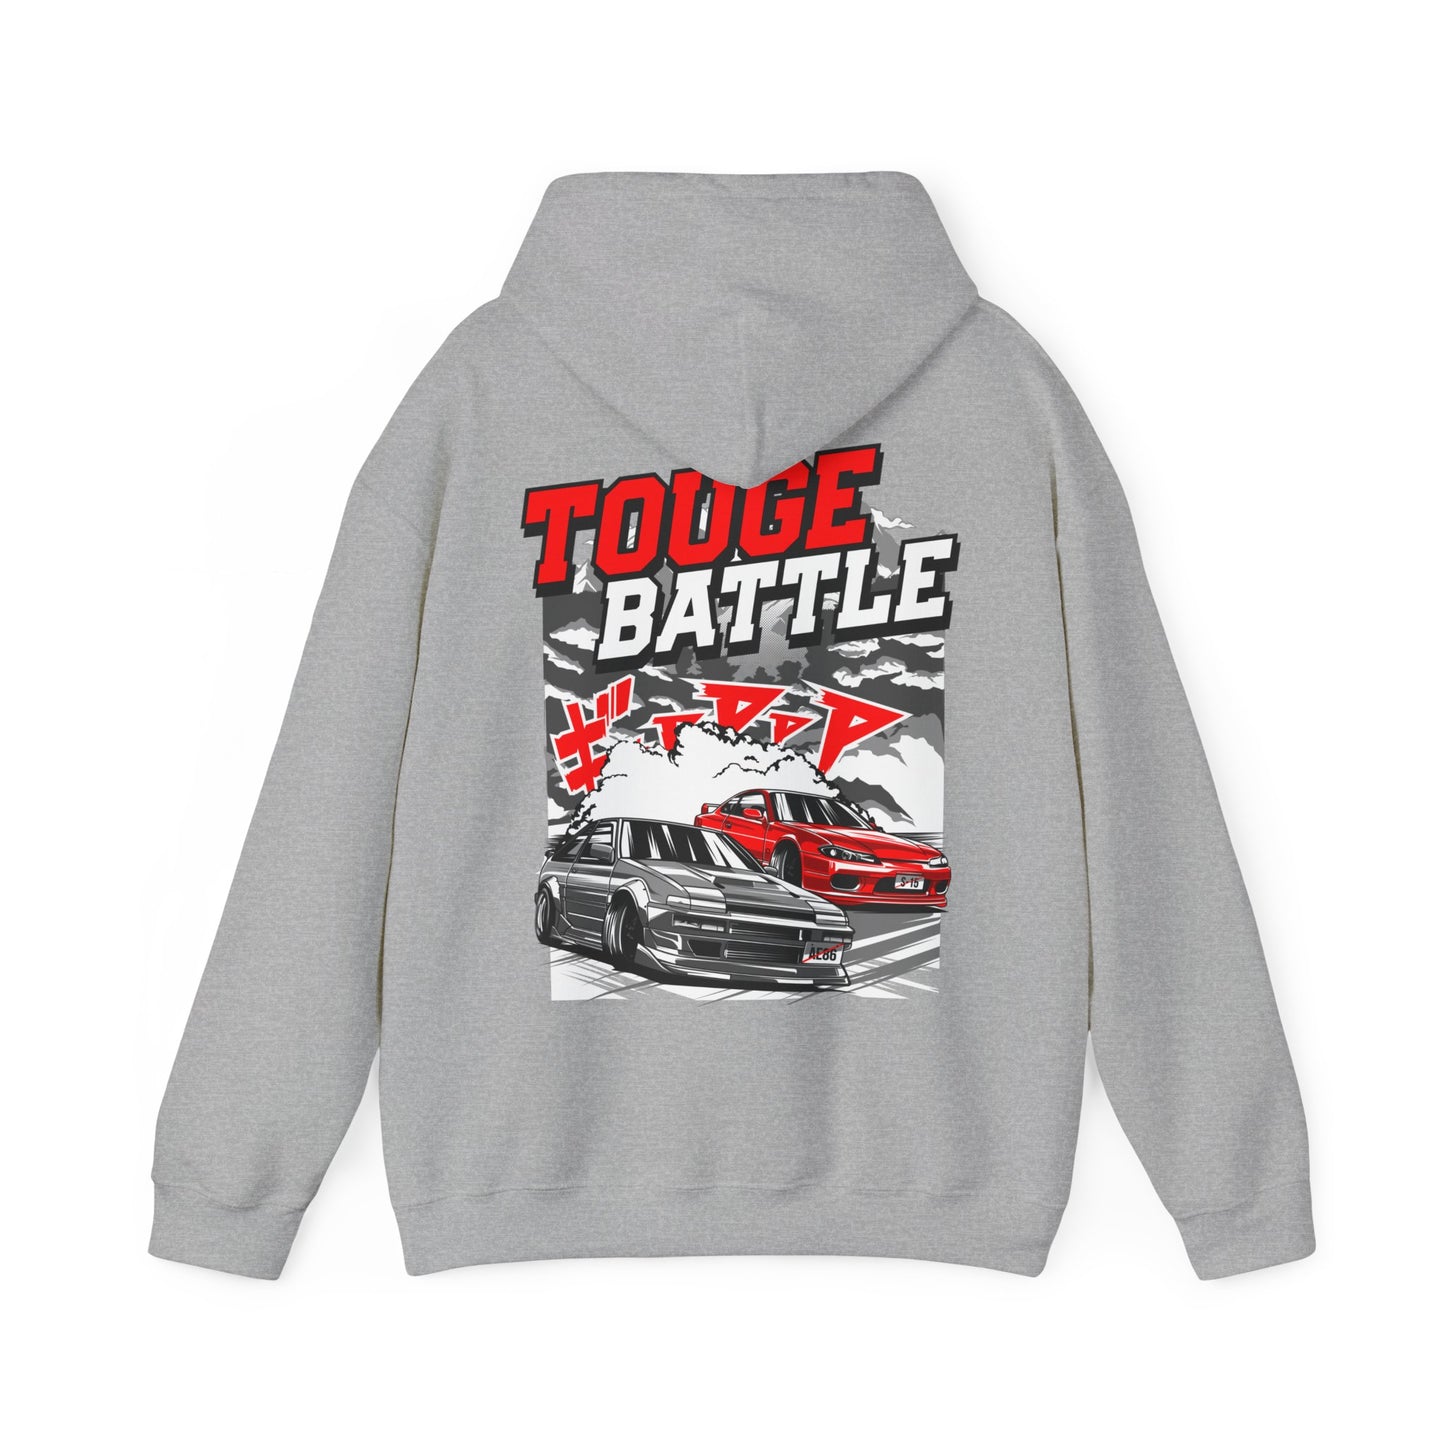 TOUGE BATTLE "AE86 VS S-15" GRAPHIC HOODIE